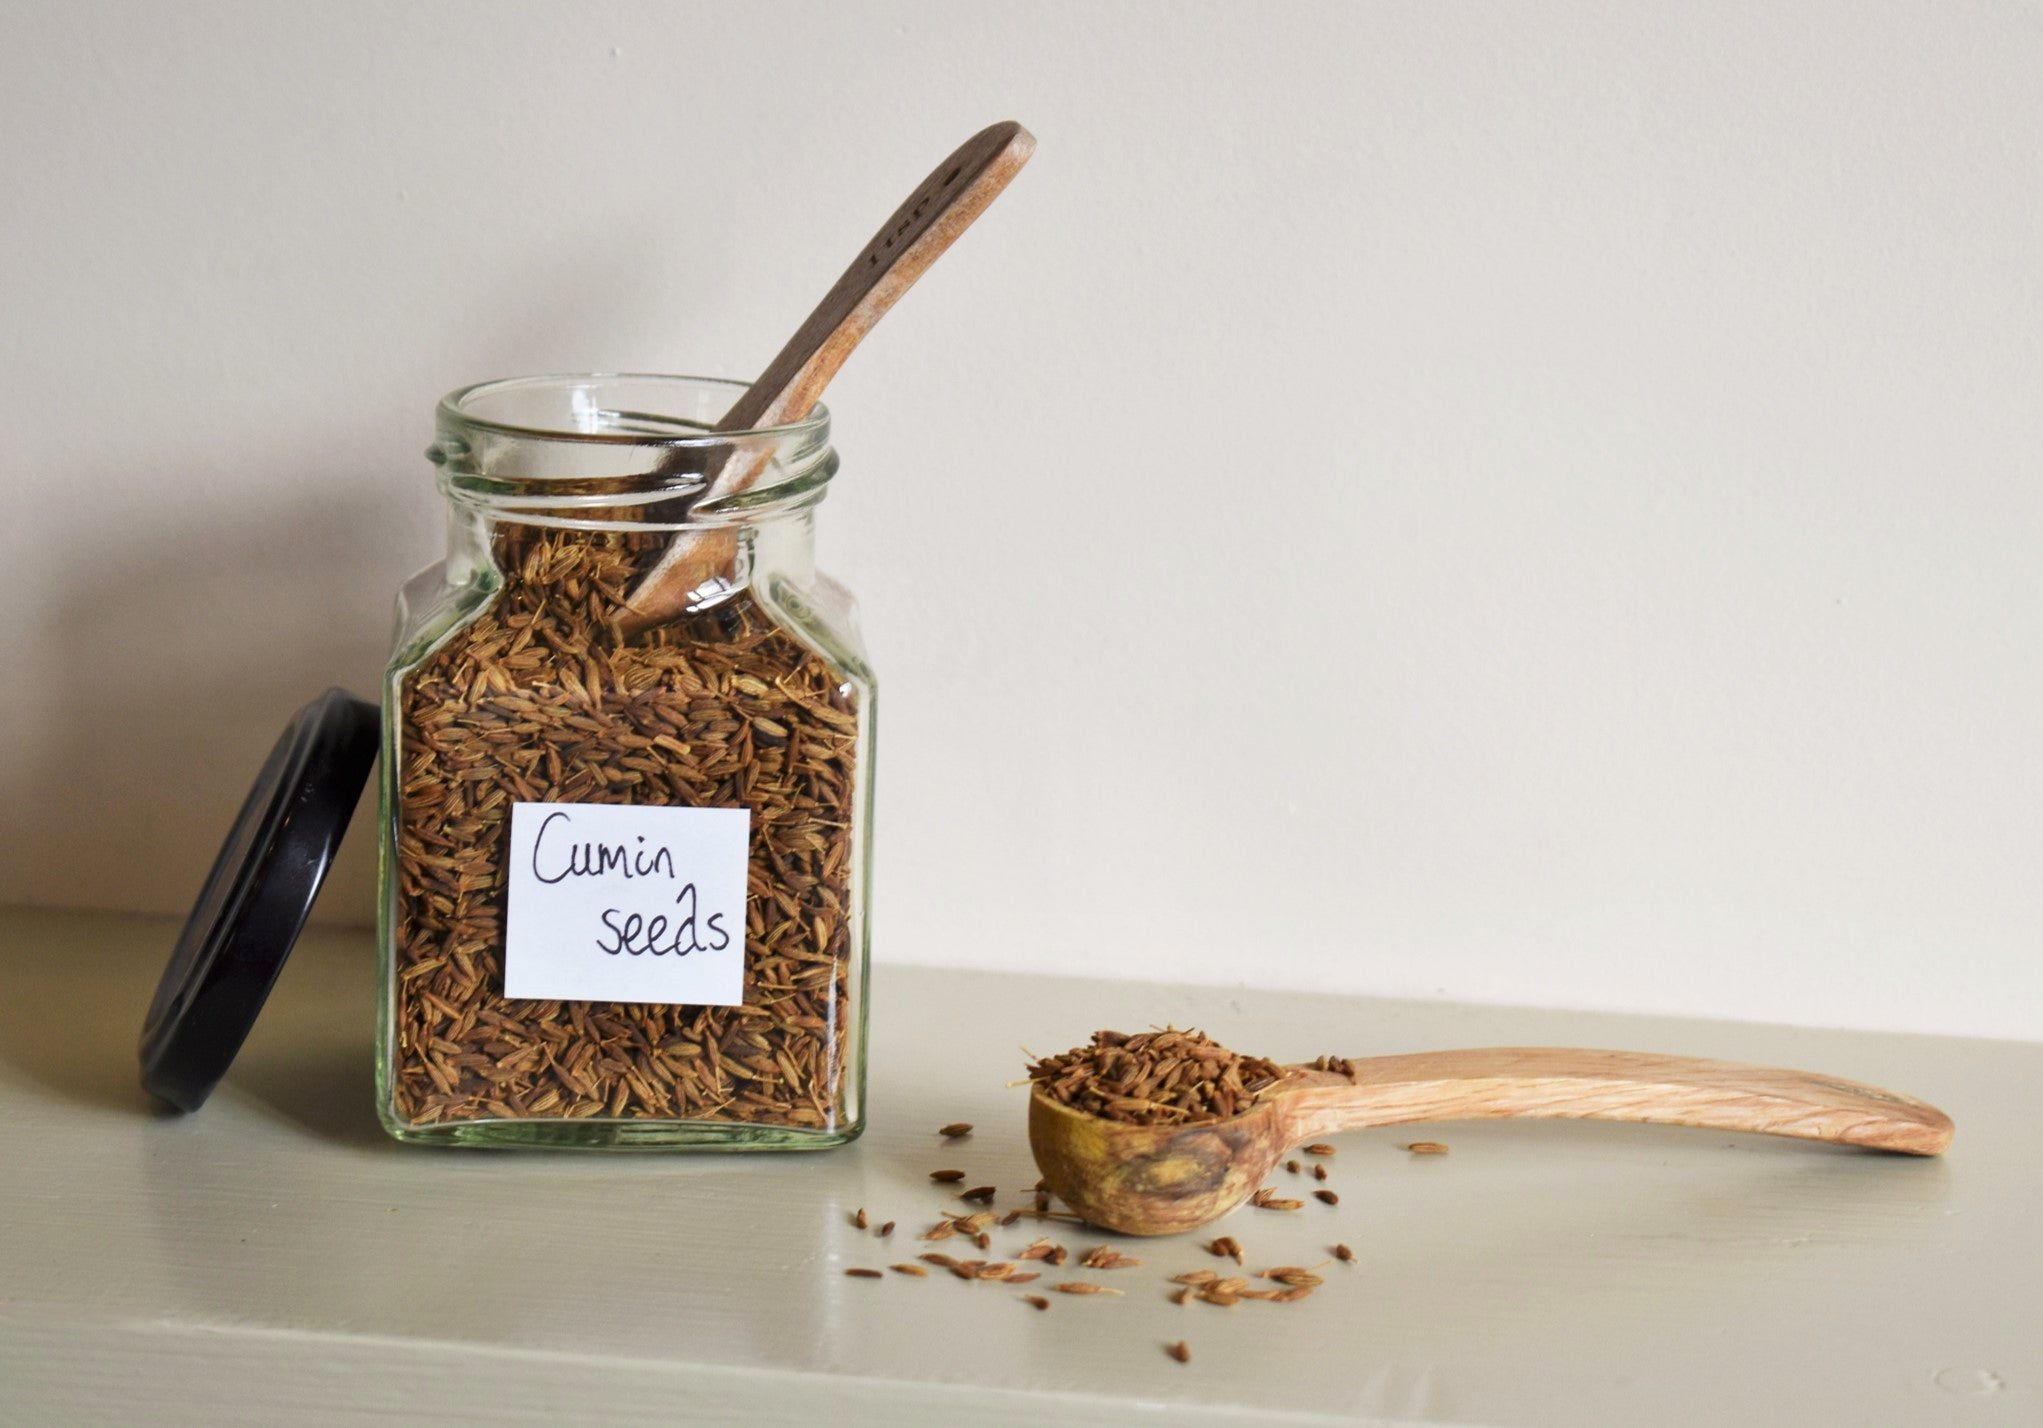 What Are Cumin Seeds Used For